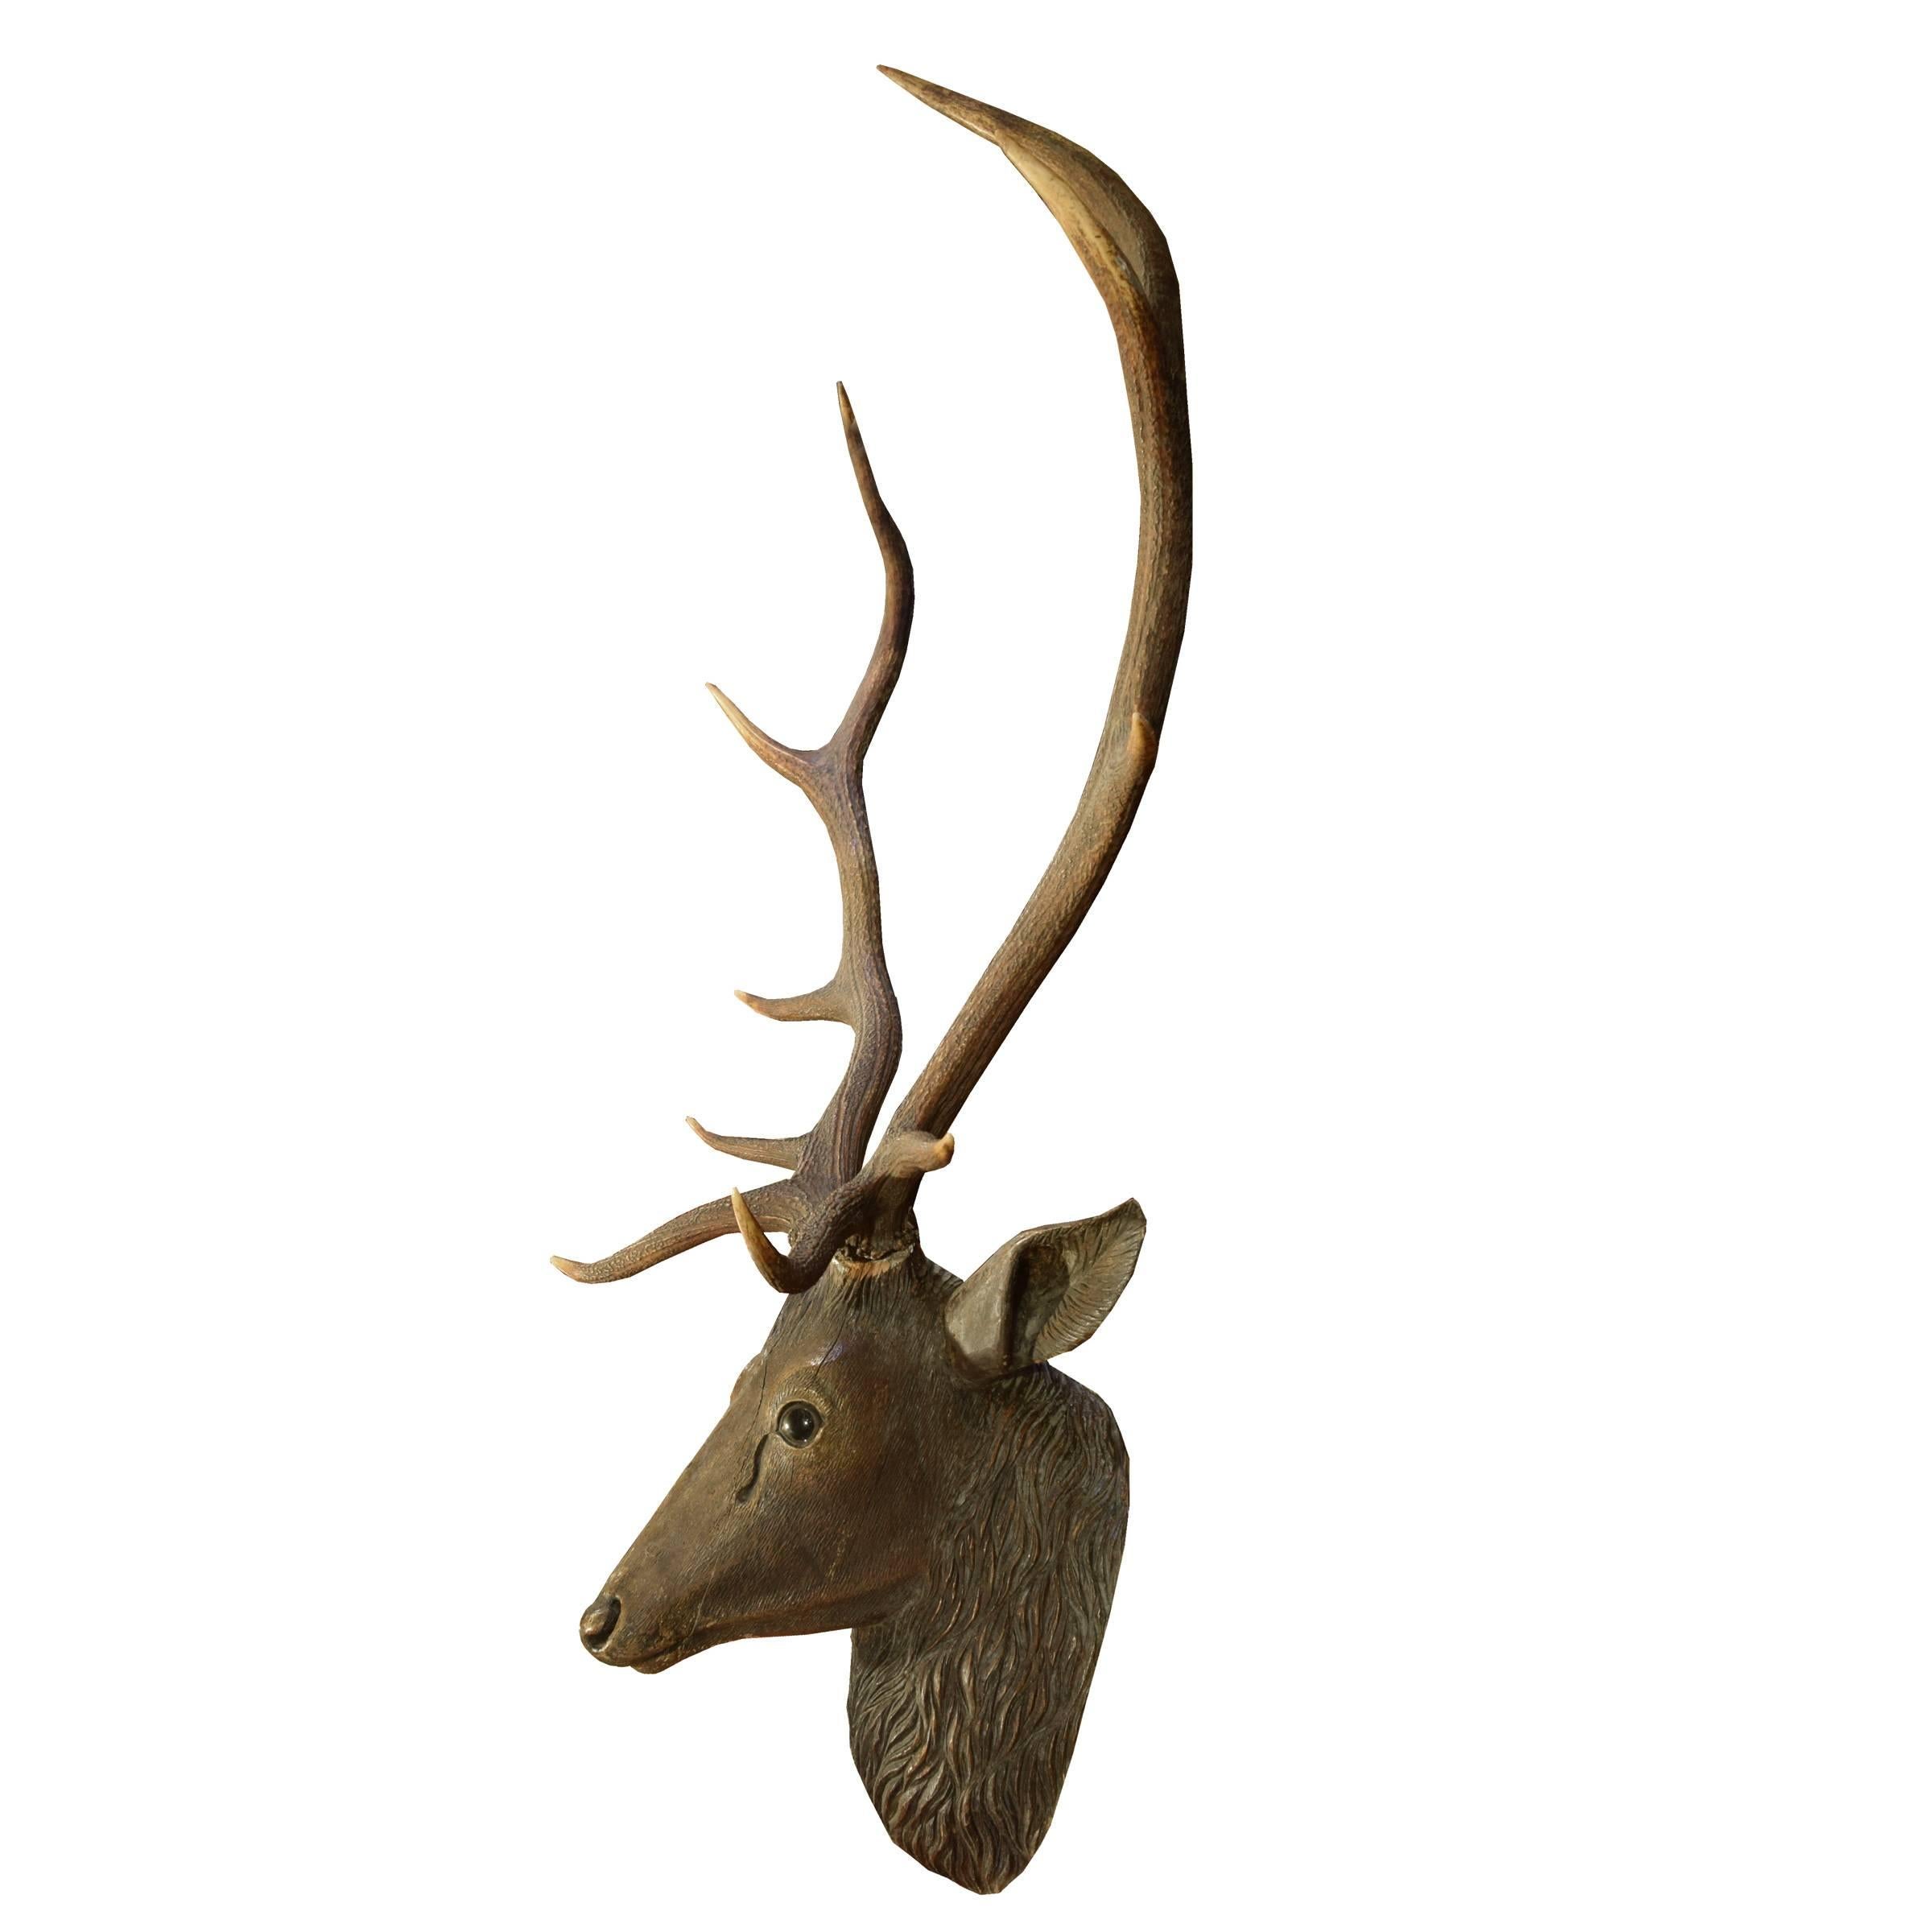 A hand-carved wood stag head with genuine antlers from a Bavarian hunting lodge, late 19th century.